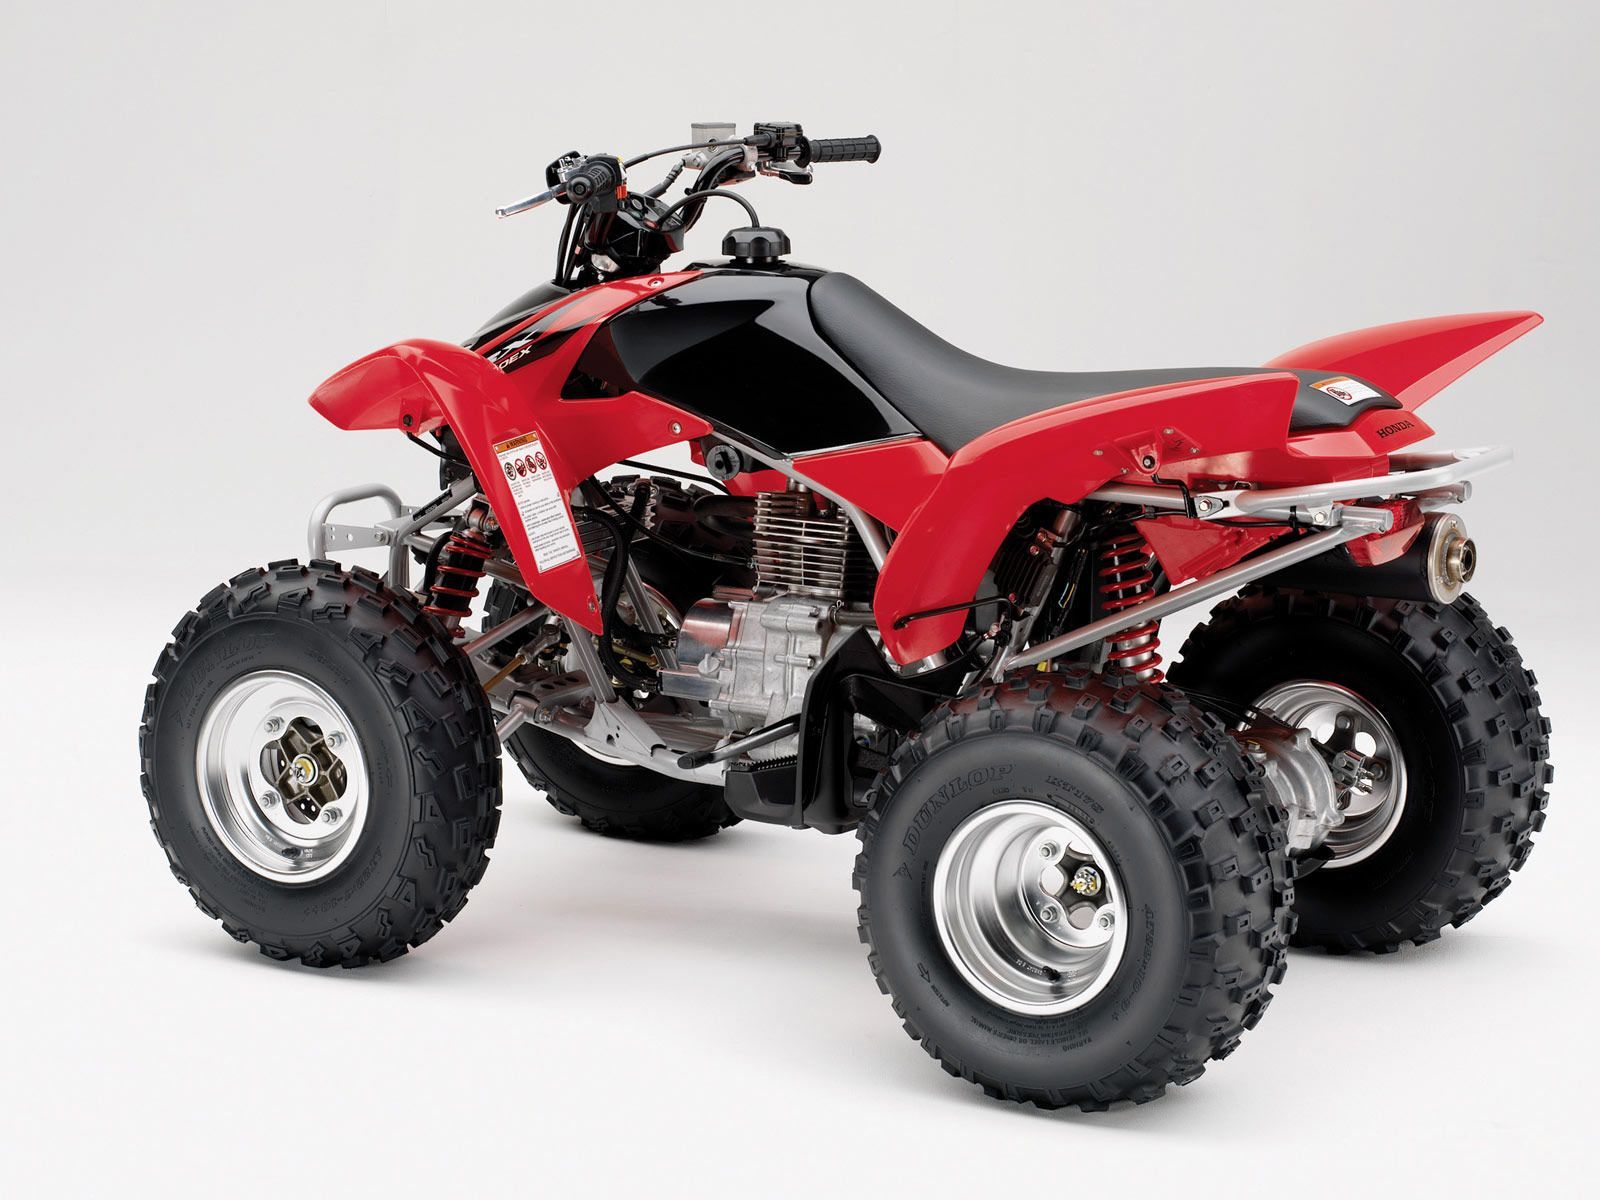 TRX250EX picture. HONDA accident lawyers information. Honda, Dirtbikes, Four wheelers